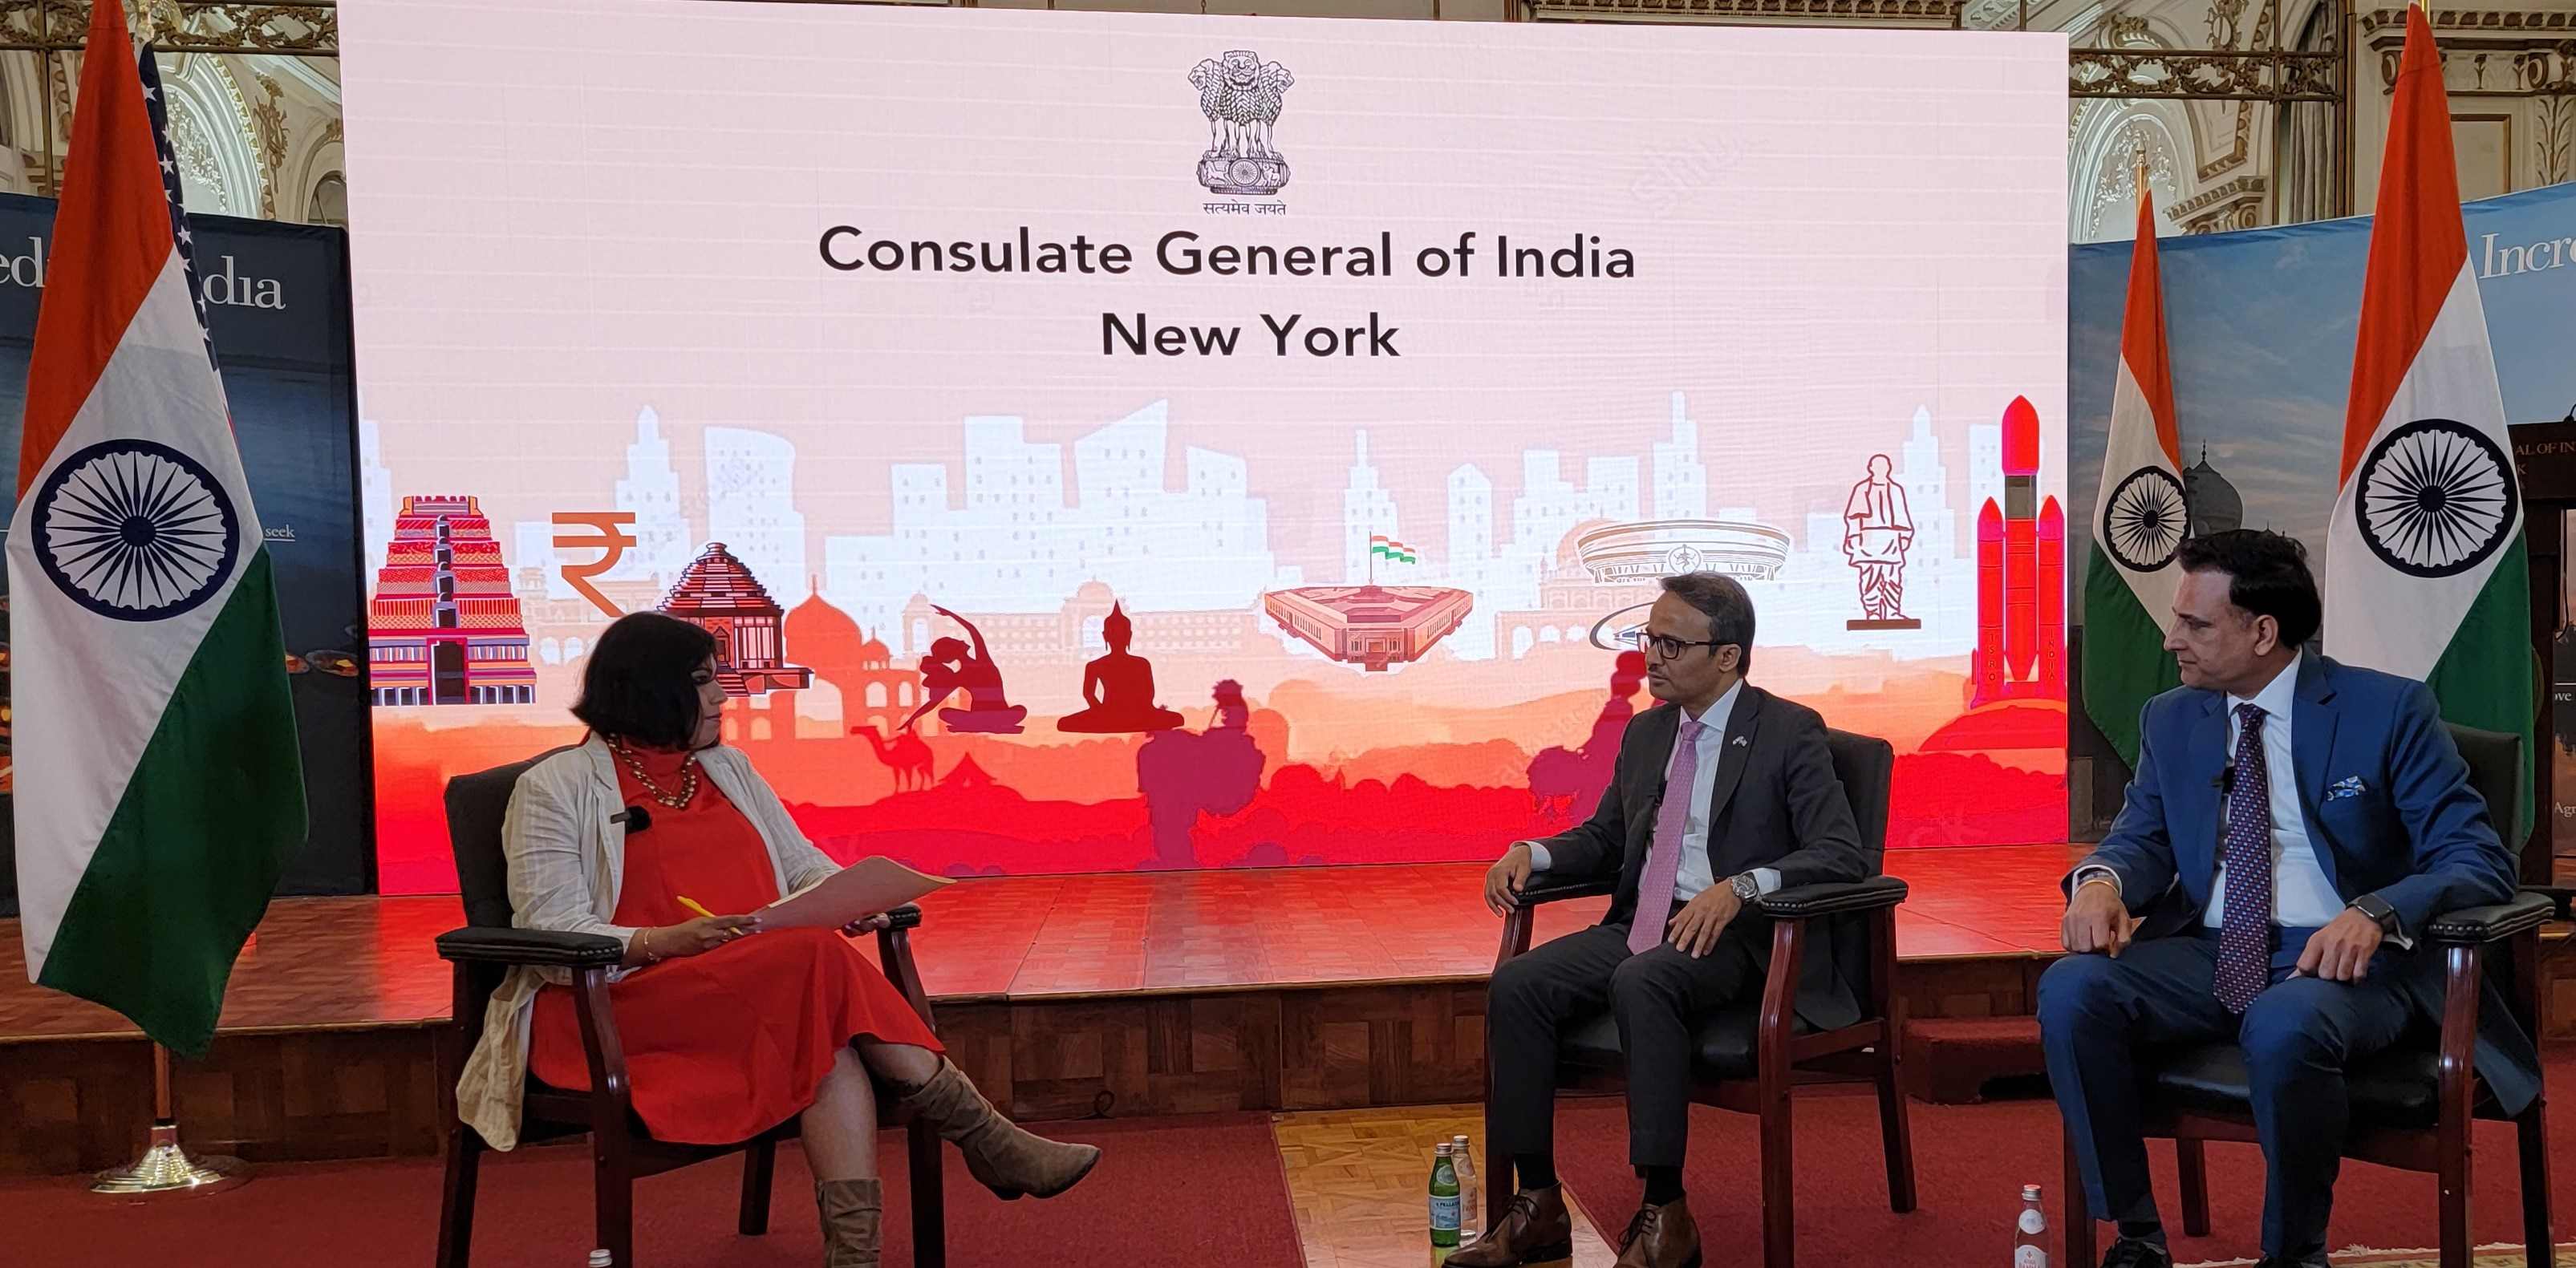 Exclusive interview with Consul General of India in New York, Binaya S Pradhan